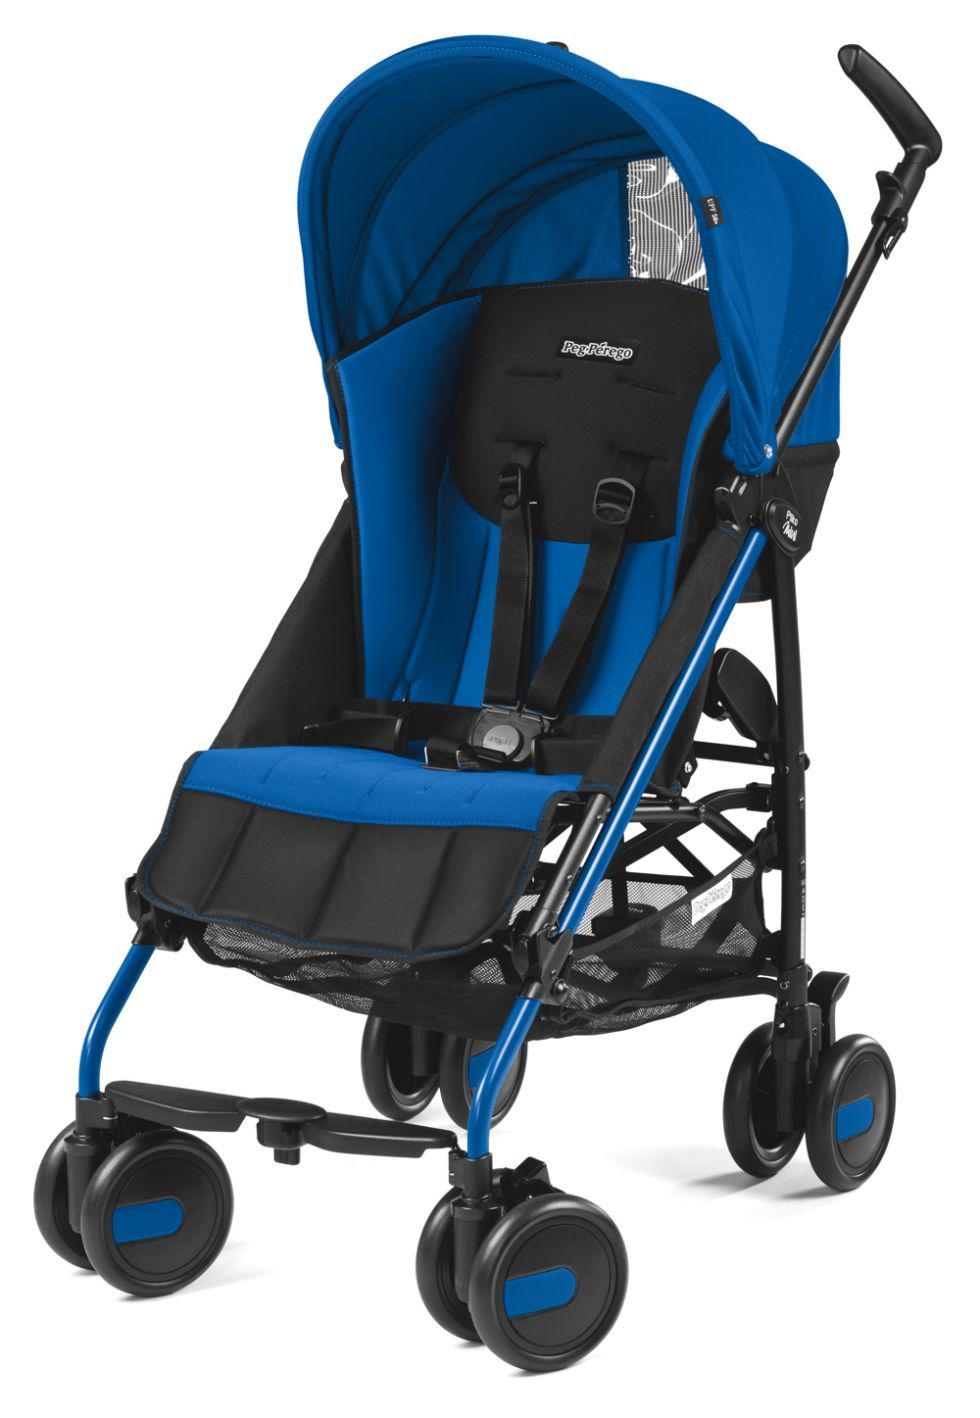 Baby carriage, Product, Blue, Baby Products, Cobalt blue, Electric blue, Vehicle, 